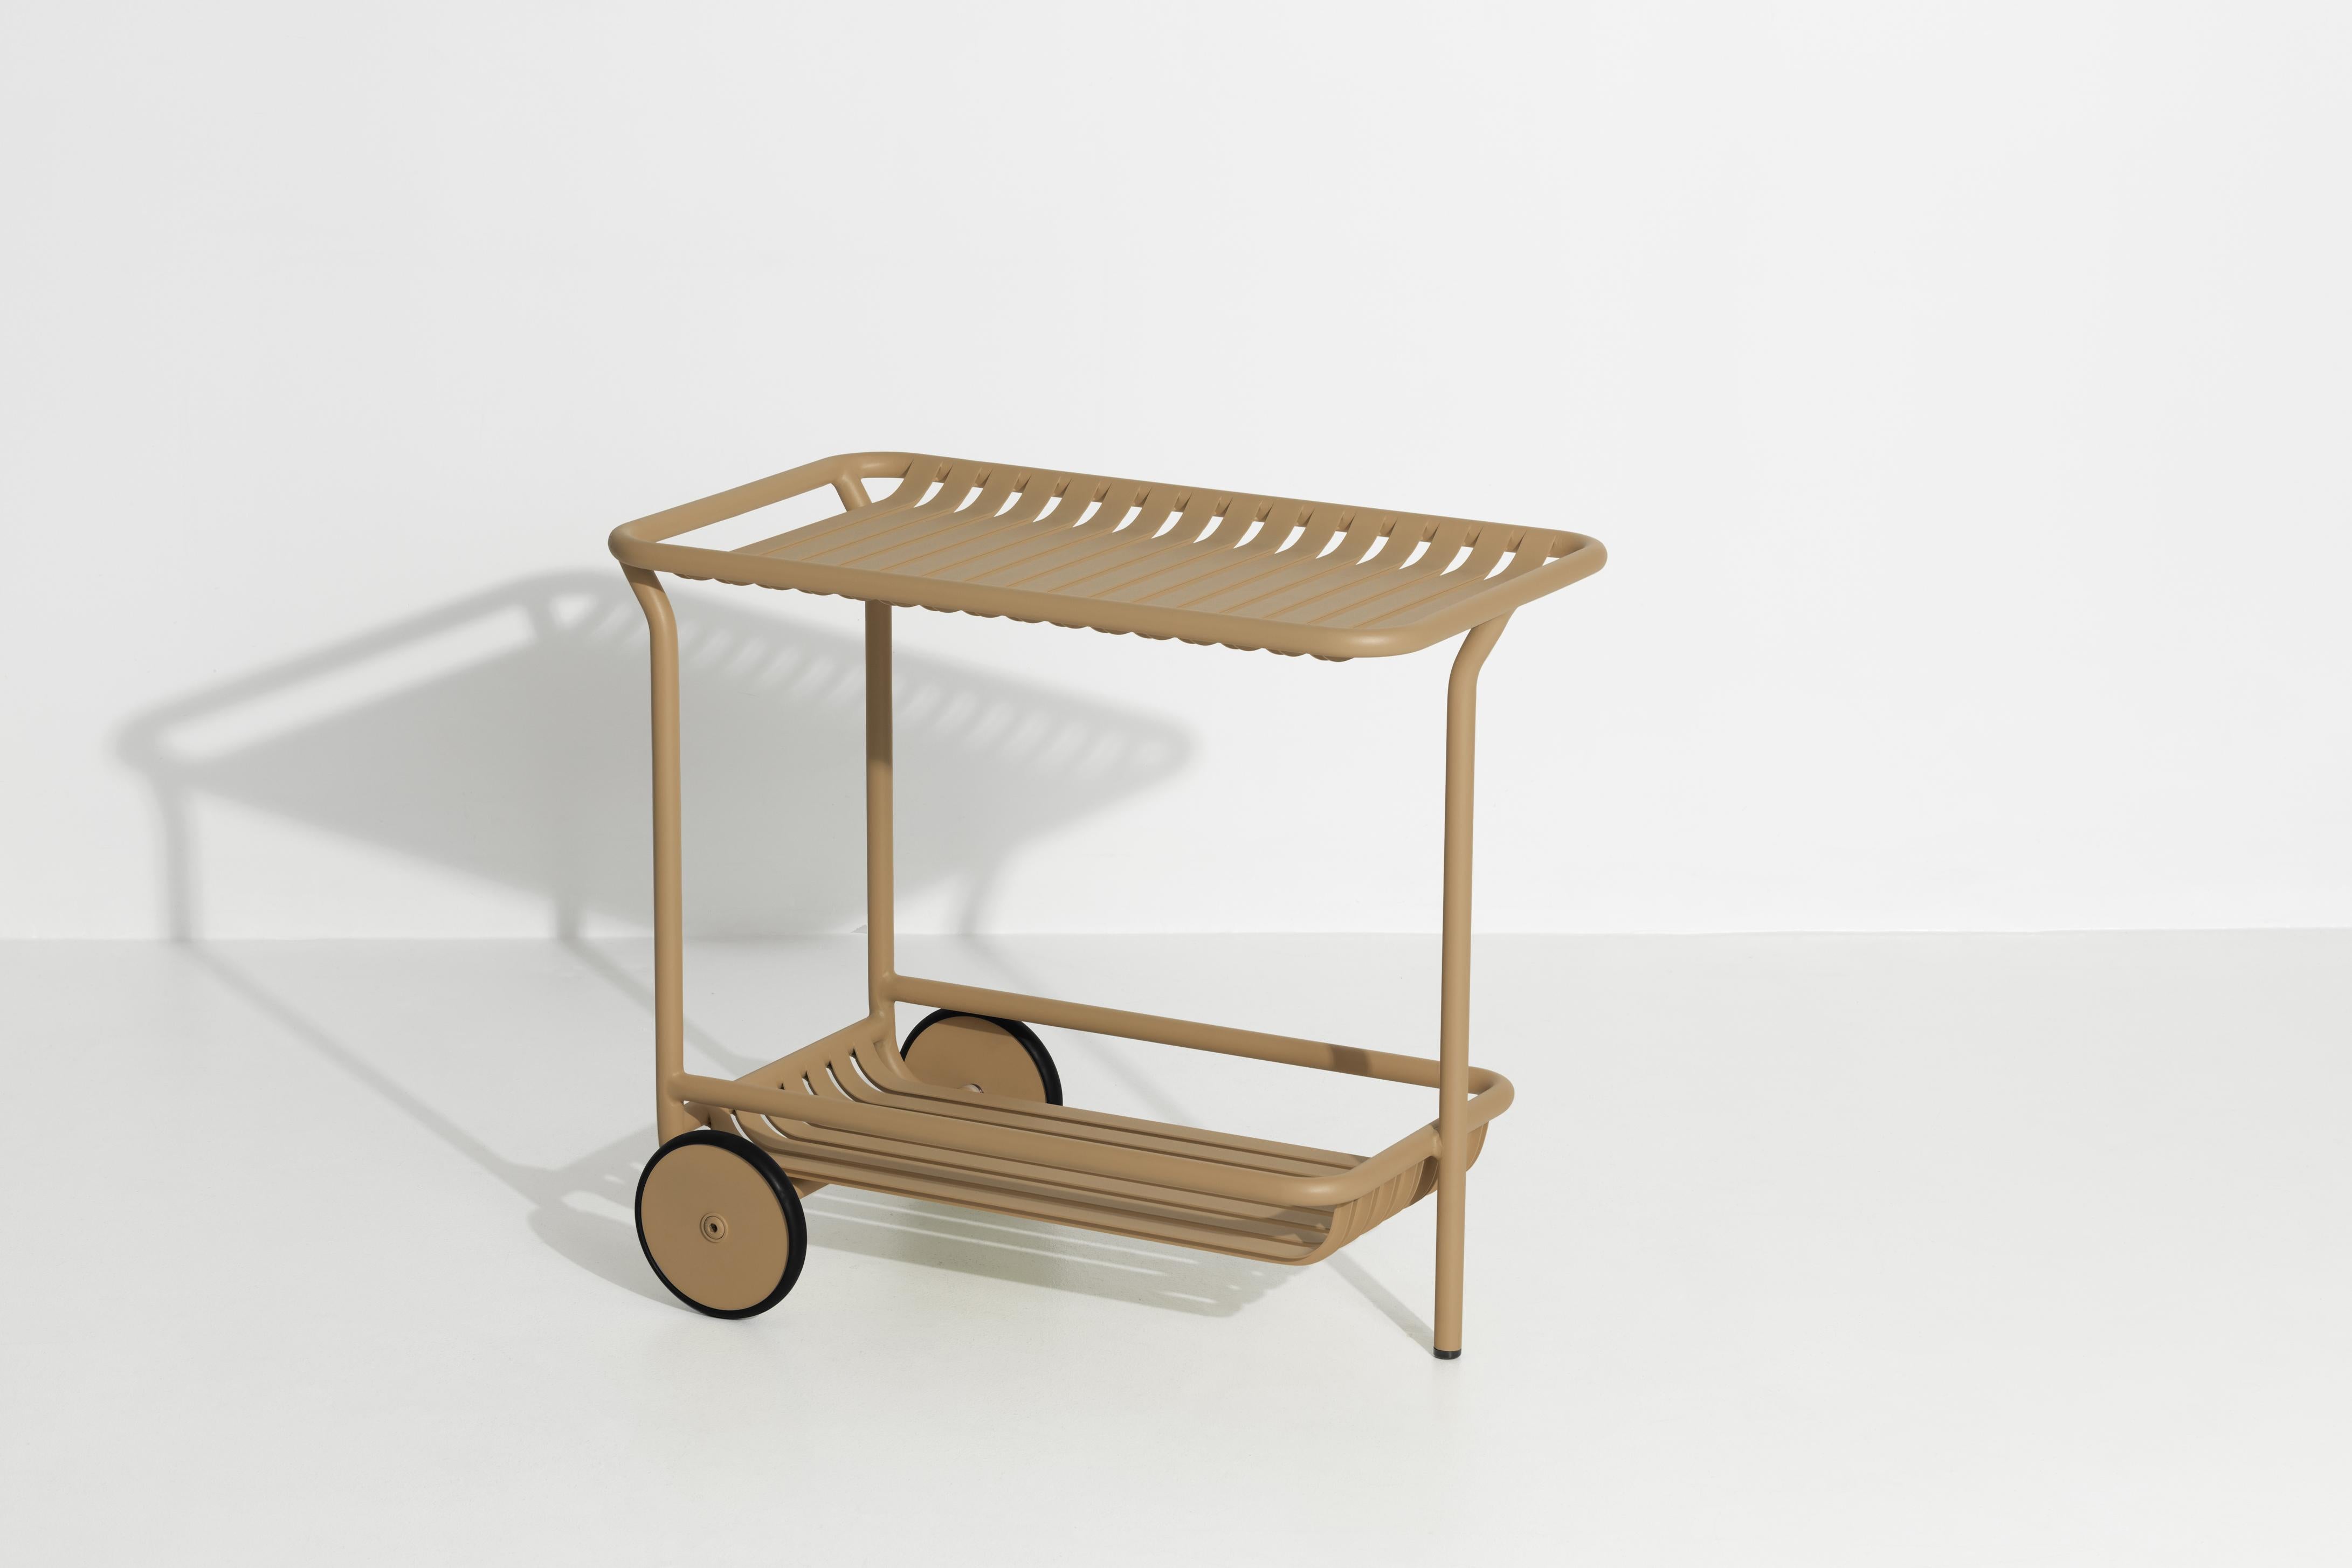 Petite Friture Week-End Trolley in Gold Aluminium by Studio BrichetZiegler, 2017

The week-end collection is a full range of outdoor furniture, in aluminium grained epoxy paint, matt finish, that includes 18 functions and 8 colours for the retail